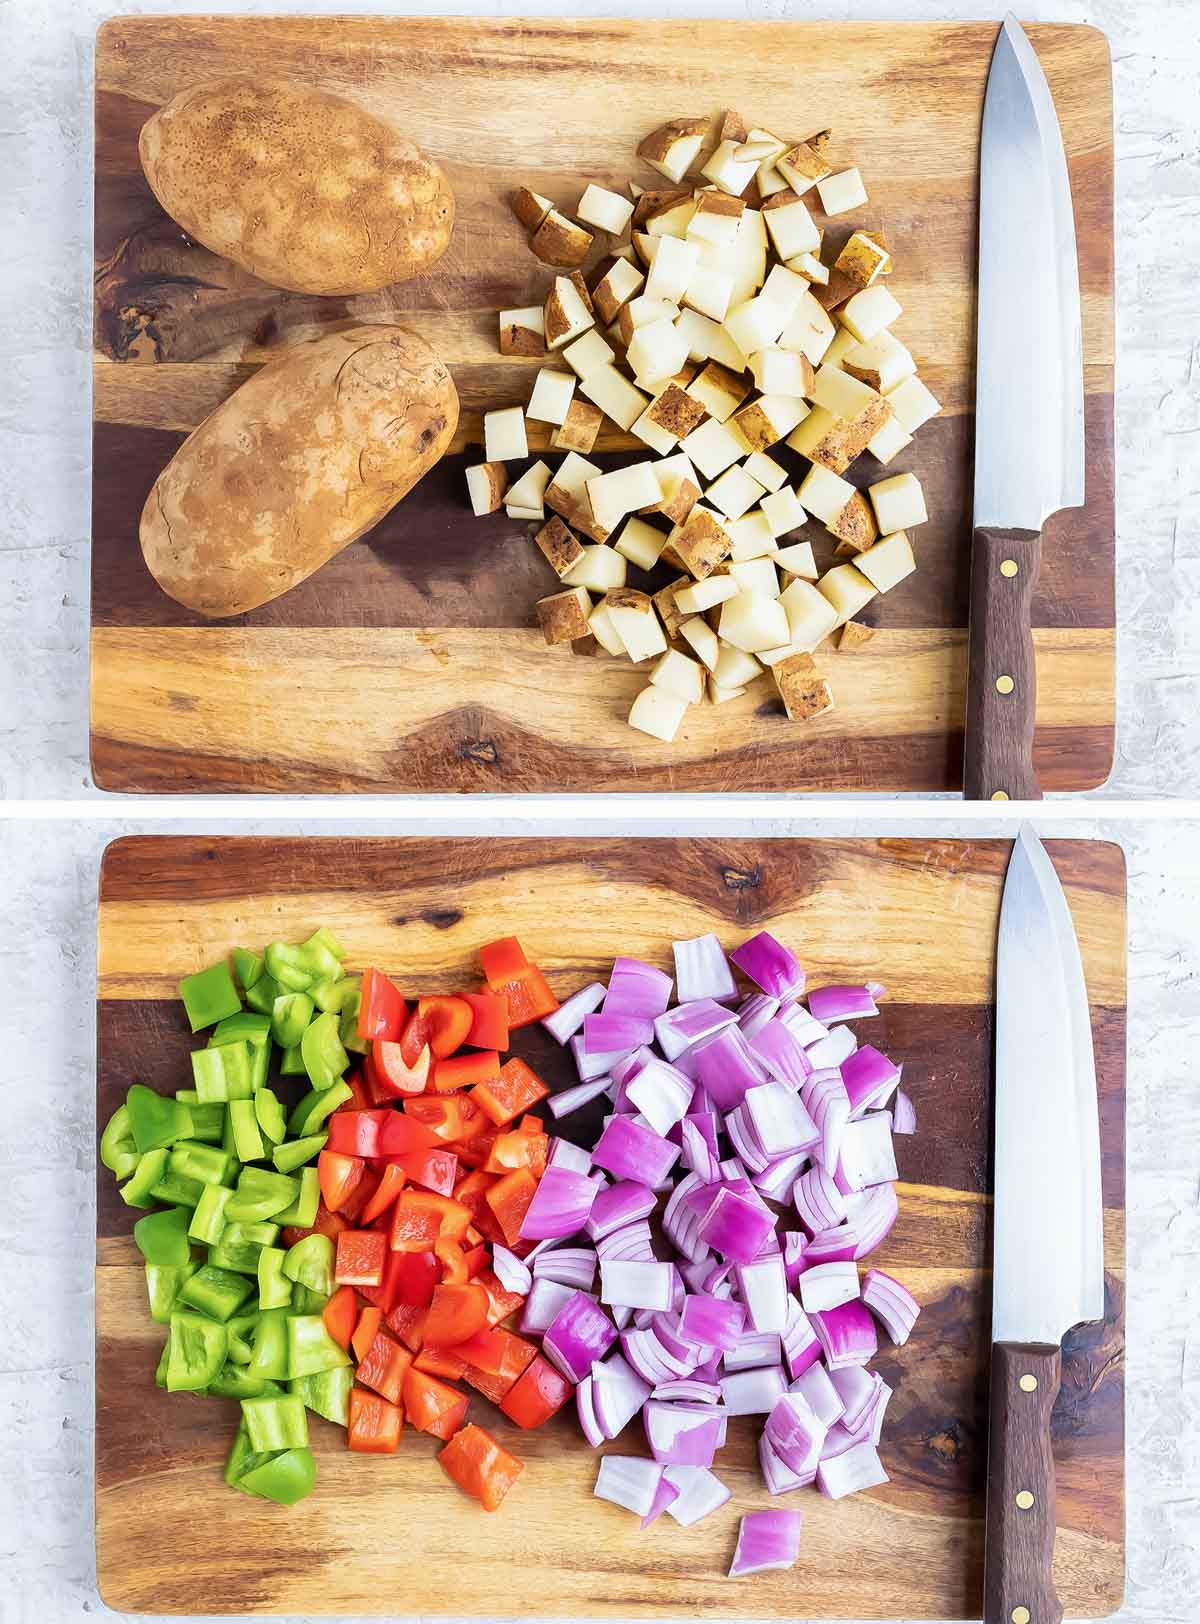 Two images showing how to prep russet potatoes and vegetables for a breakfast hash recipe.